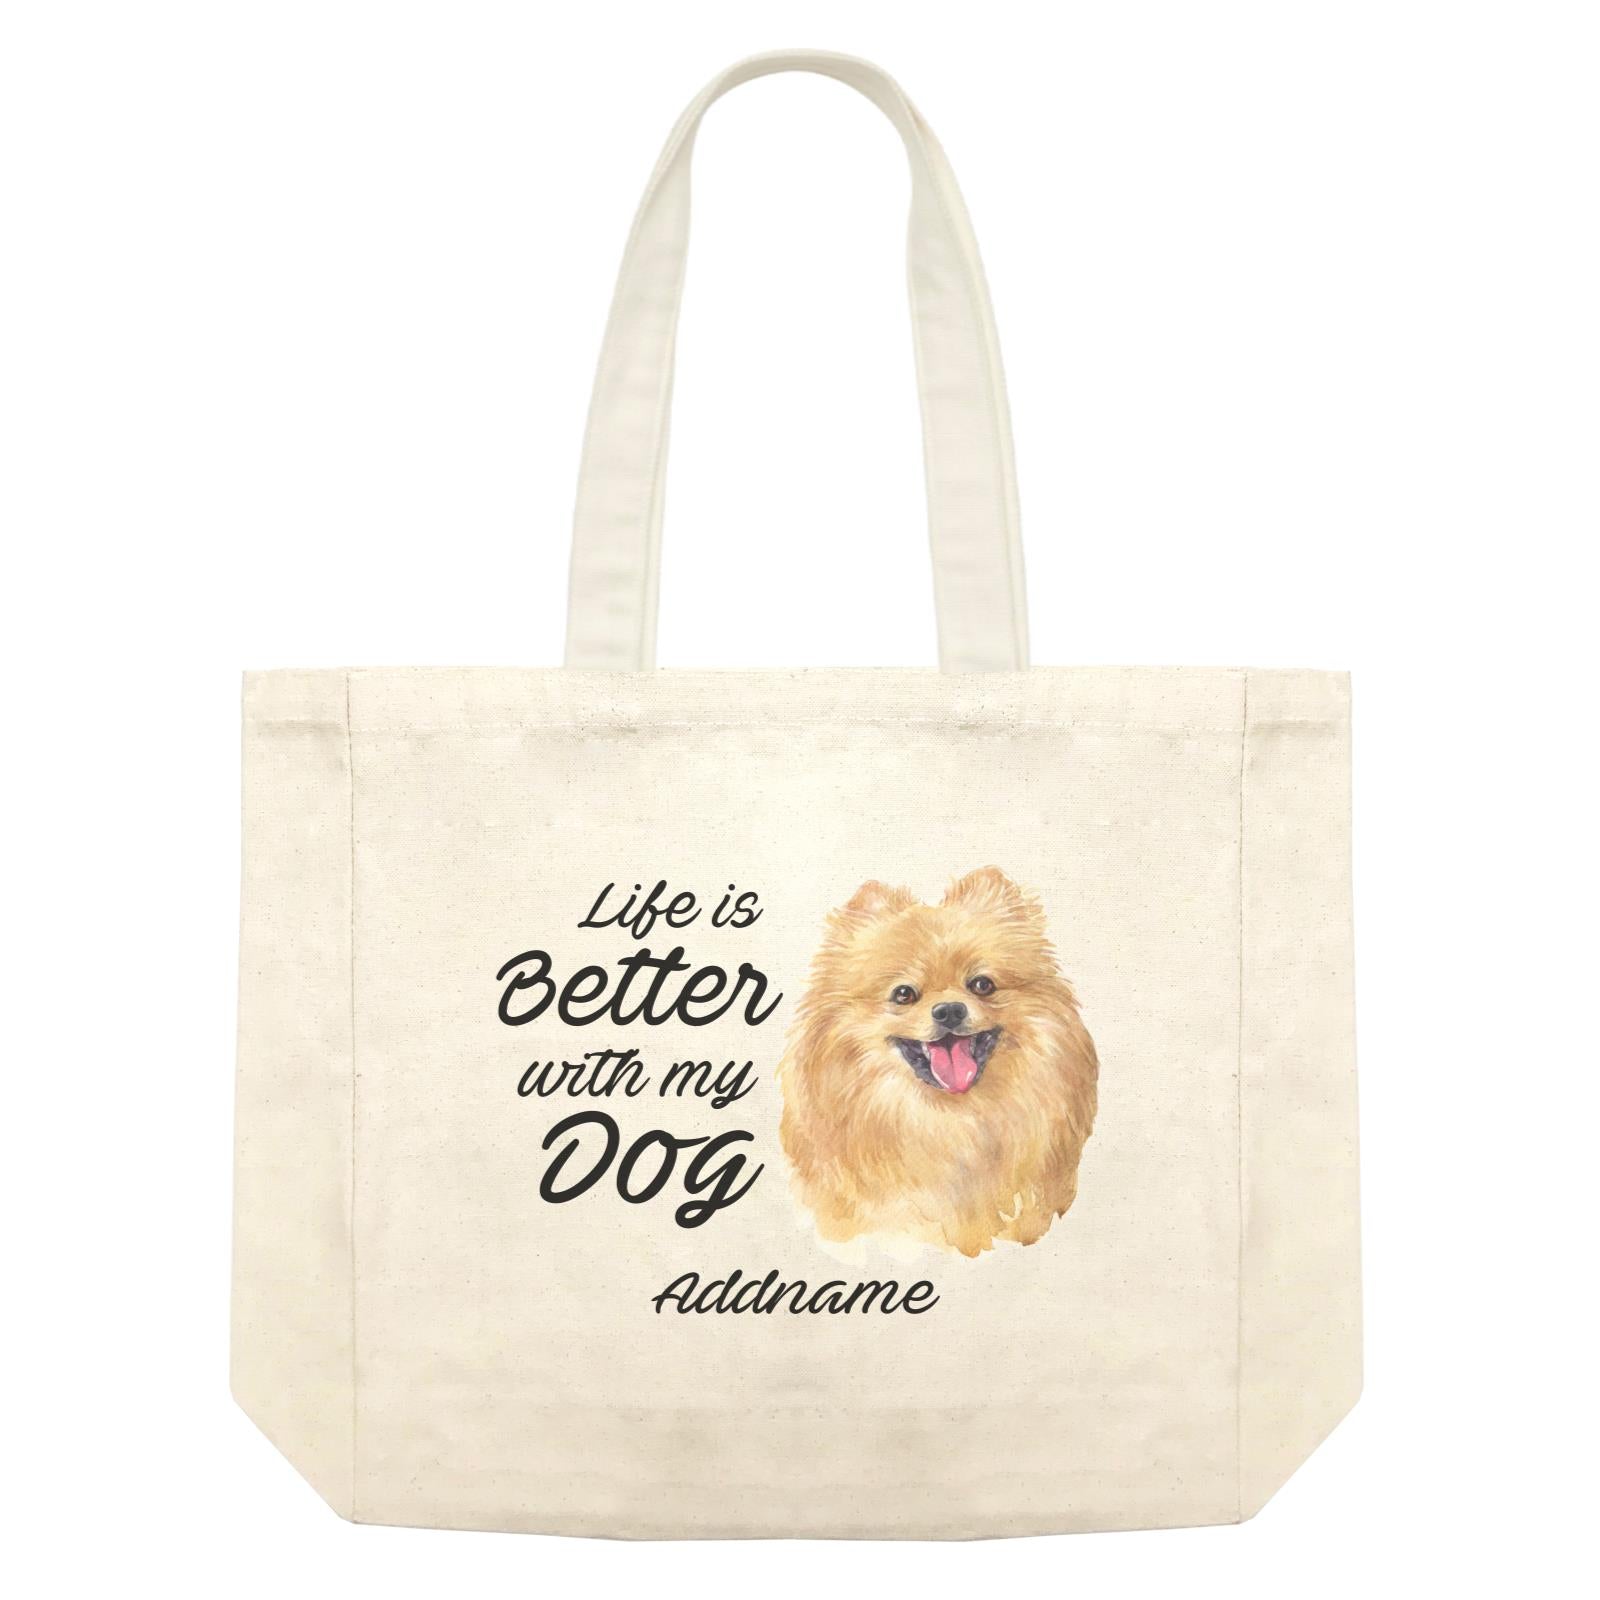 Watercolor Life is Better With My Dog Pomeranian Addname Shopping Bag